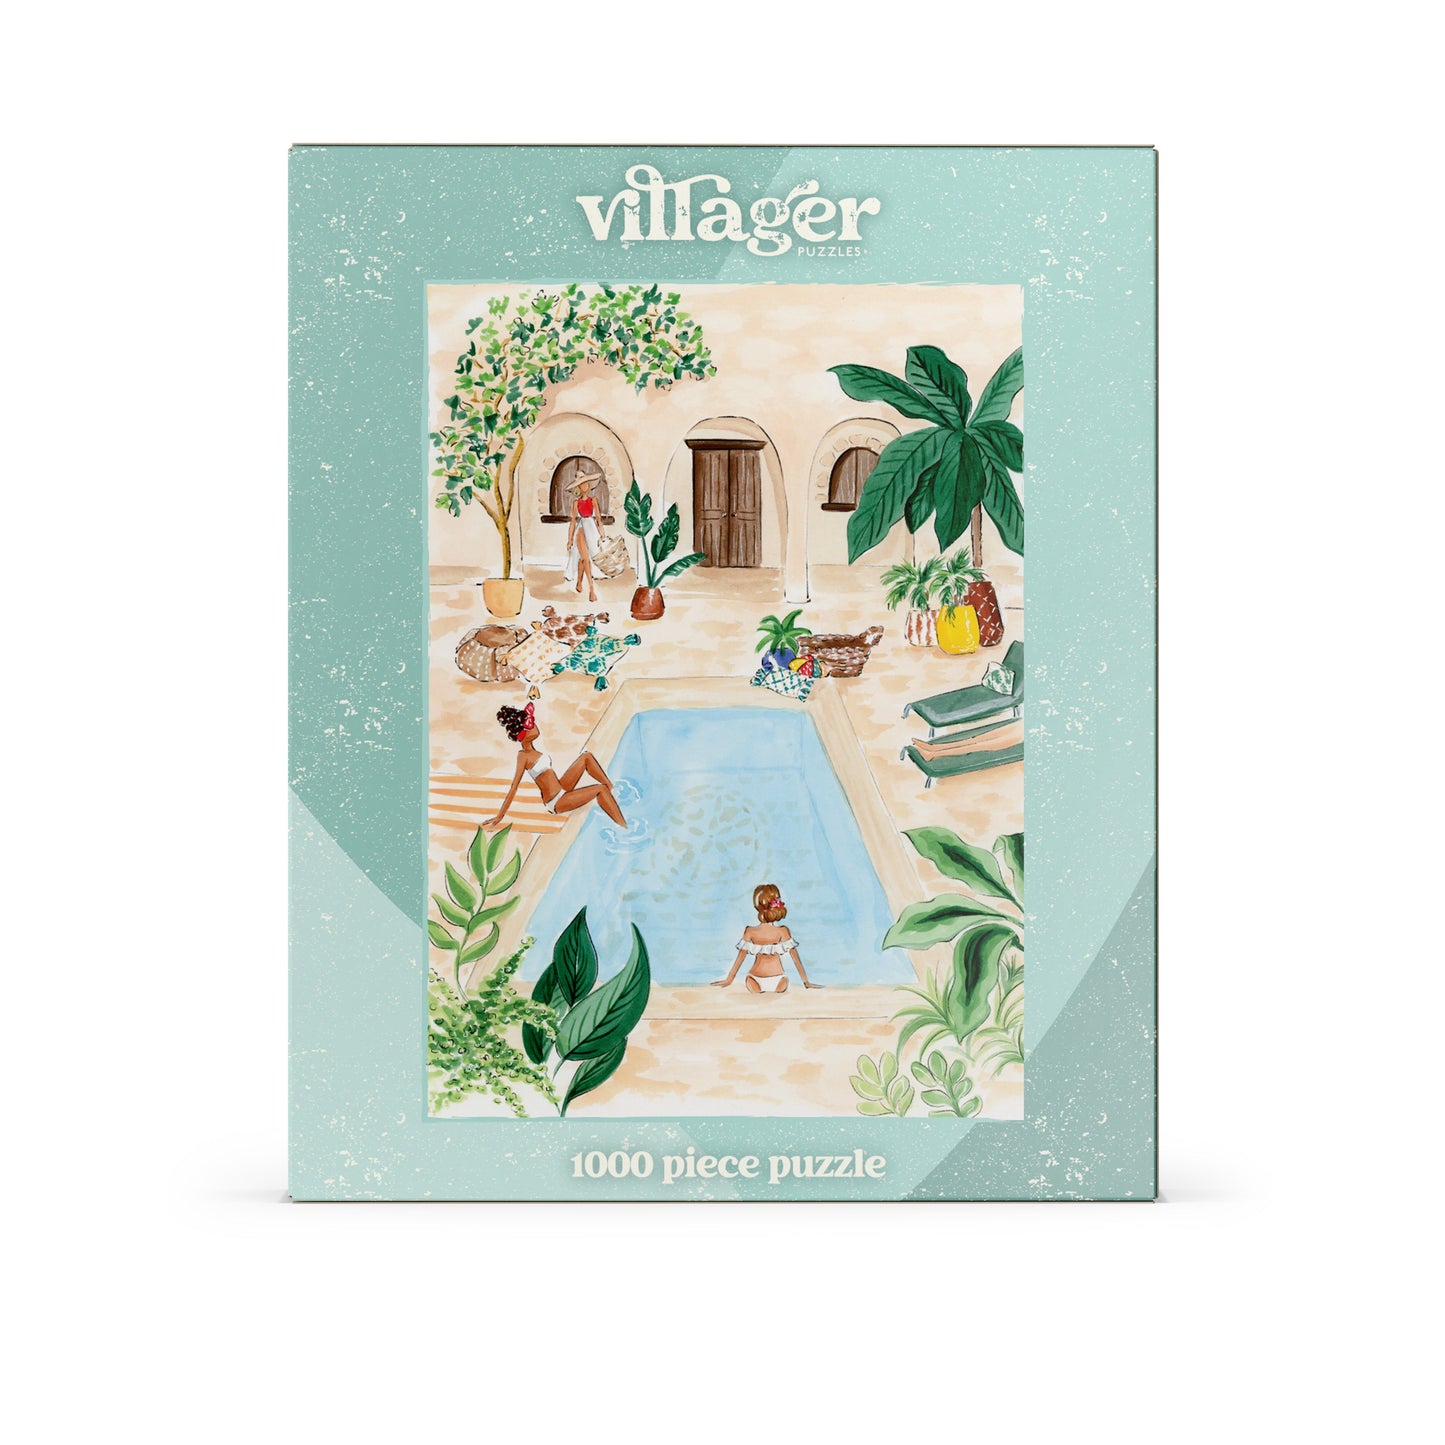 Front box image of Villager Puzzle | Girls Trip designed by Nadine de Almeida of North Vancouver BC Canada